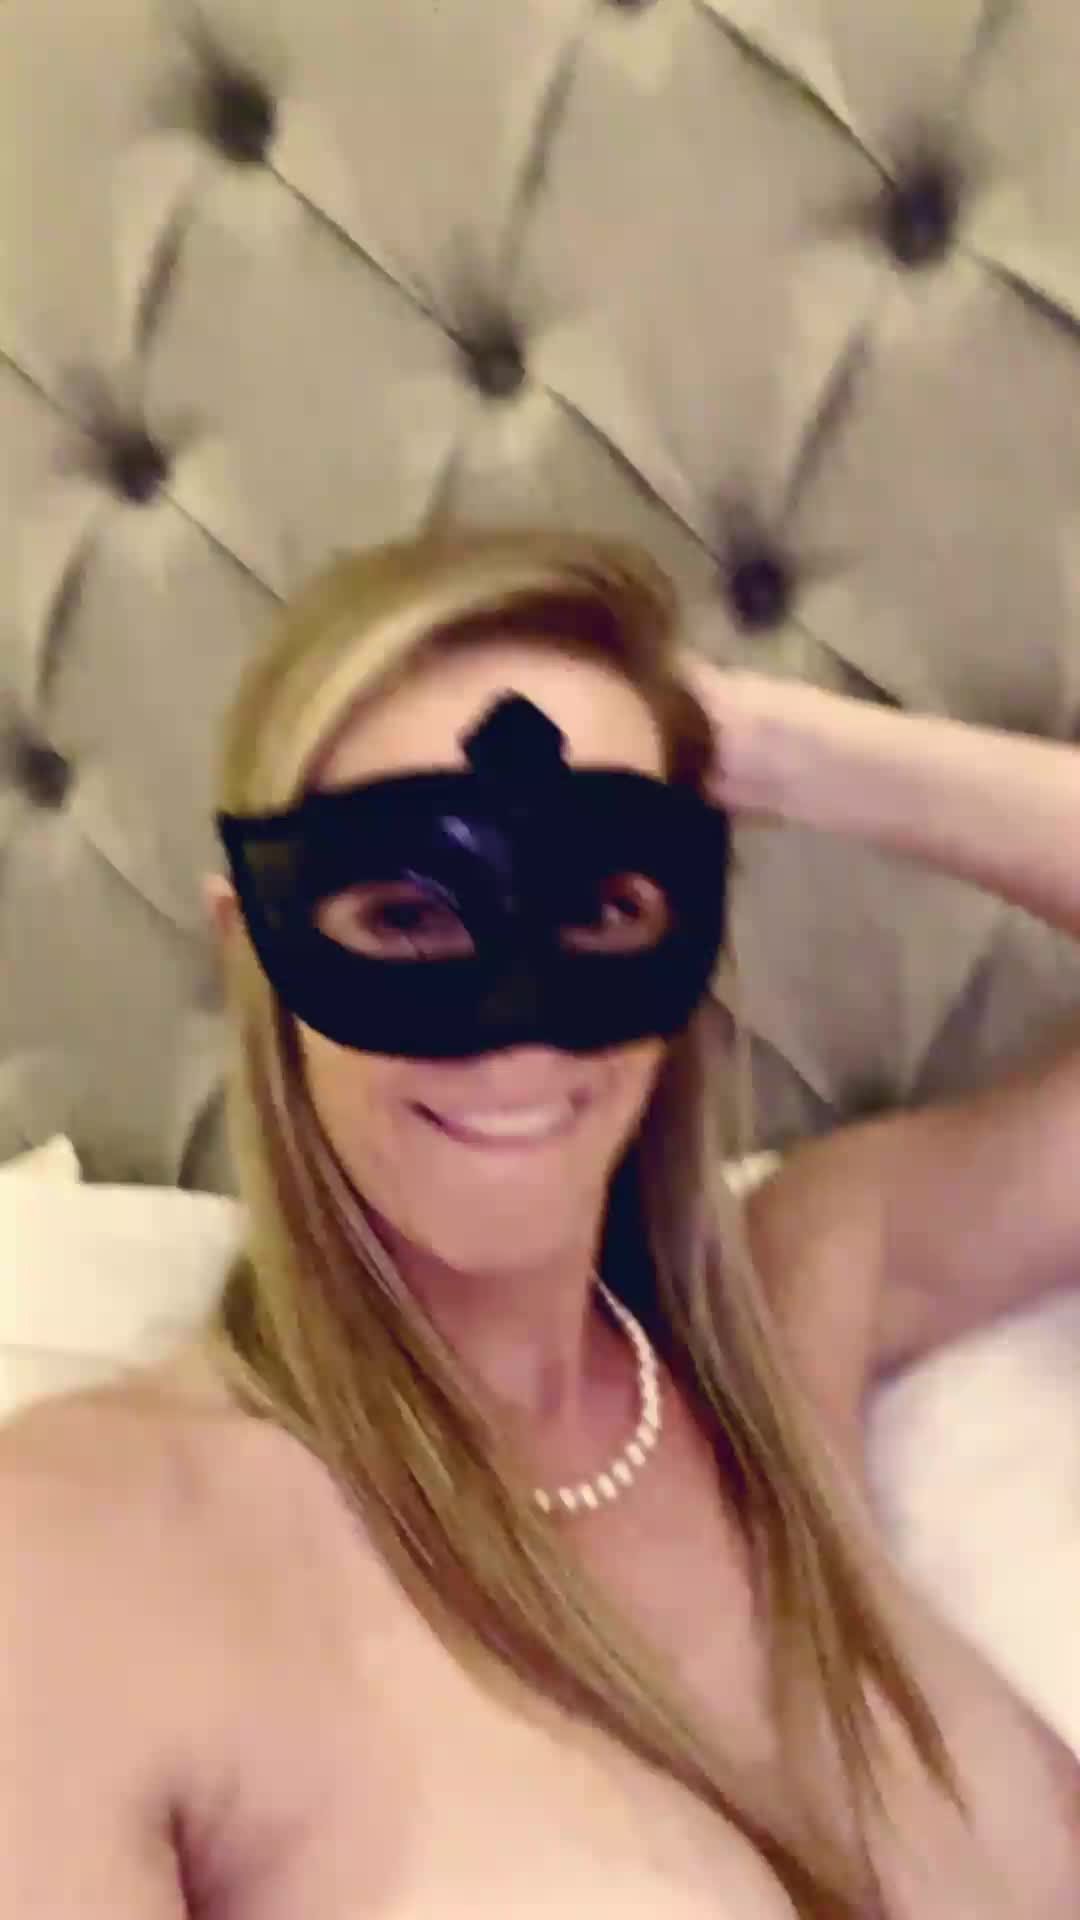 Shared Video by RedheadedMILFfun with the username @RedheadedMILFfun, who is a verified user,  April 19, 2024 at 2:57 AM. The post is about the topic Hotwife